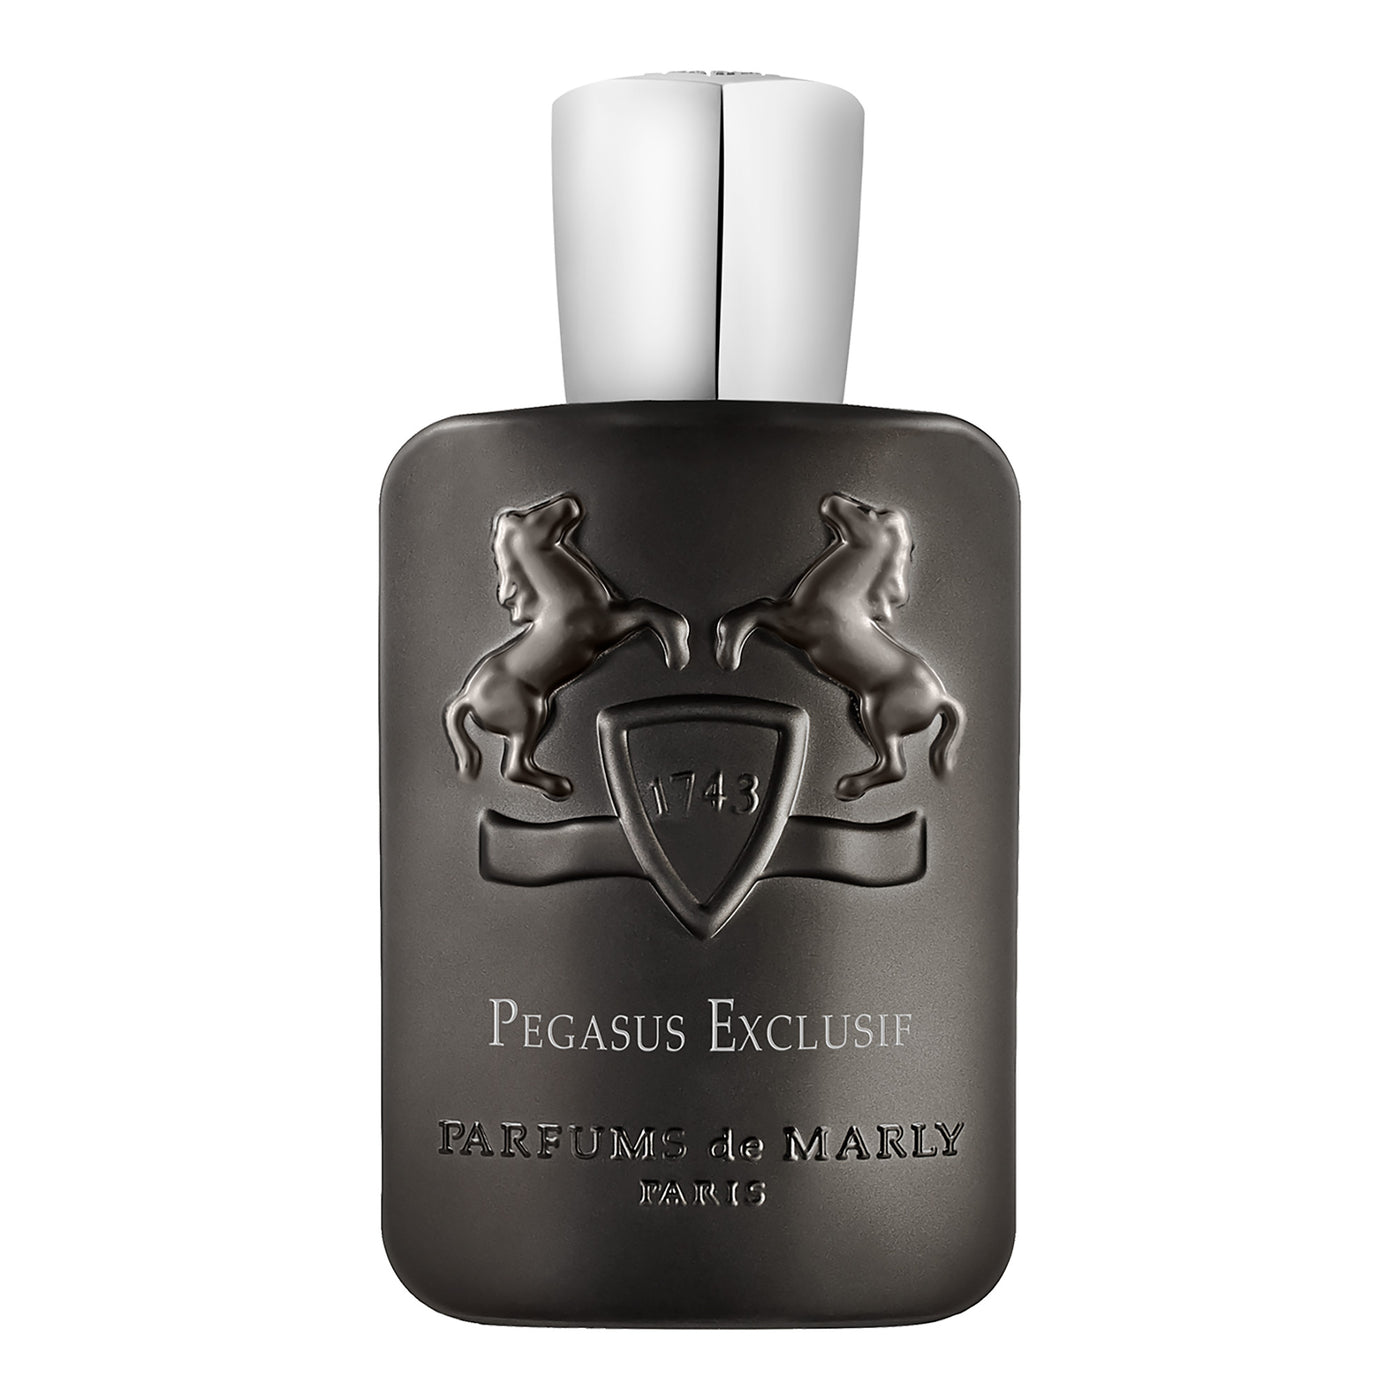 Parfums de Marly Pegasus Exclusif - 125ml - Gharyal by Collectibles 